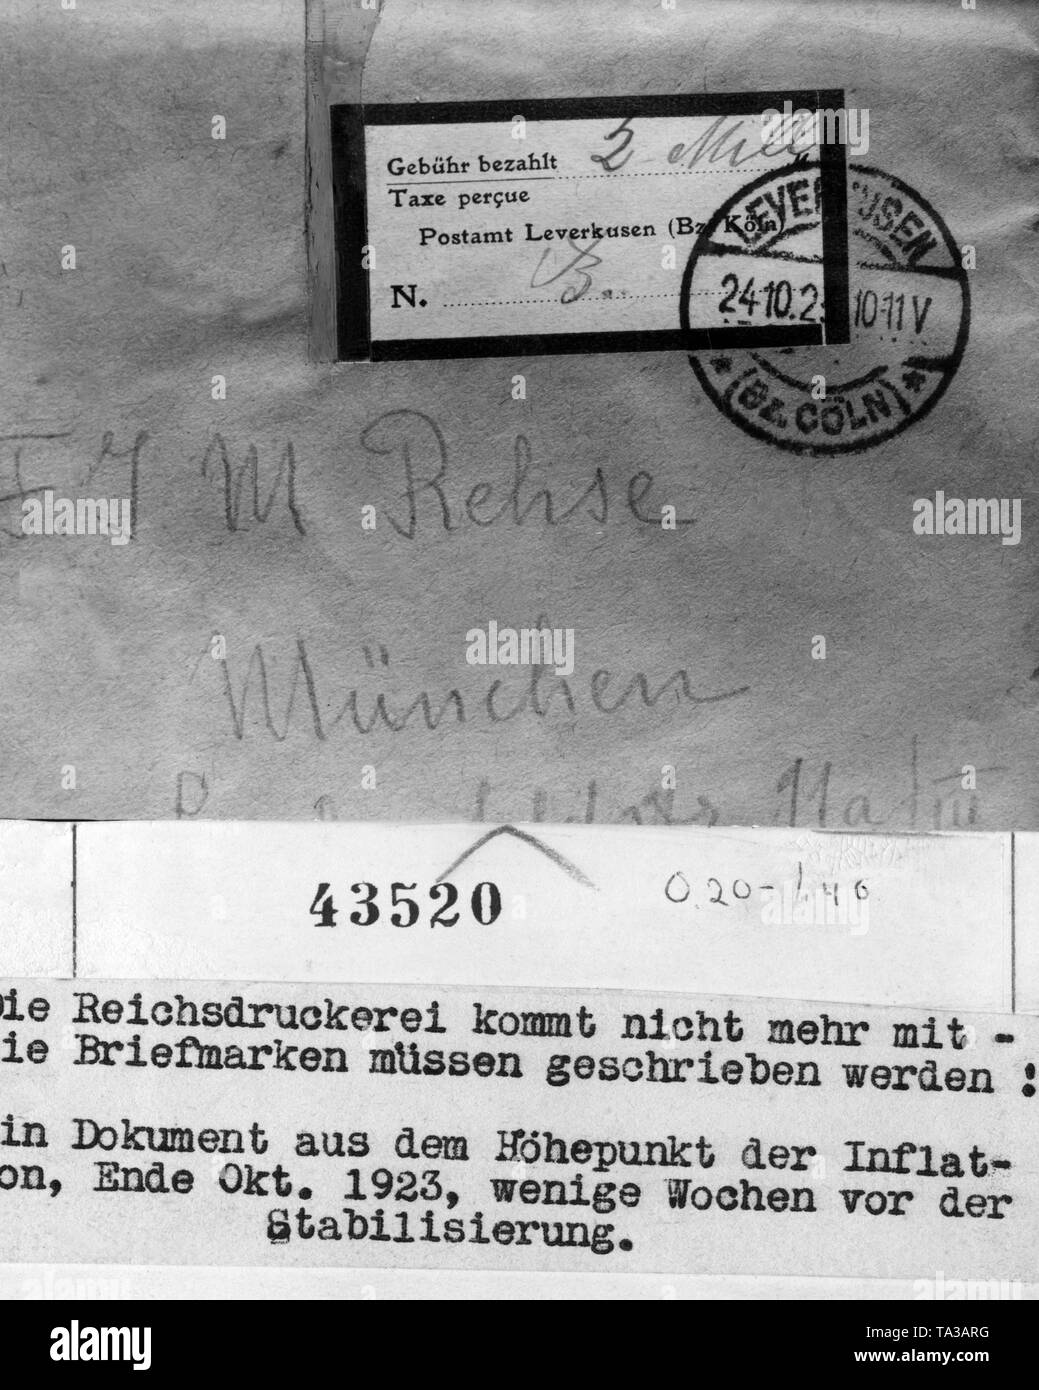 The post has to write stamps with value, here 2 million Marks, on the letters, since the Reichsdruckerei (Reich Printing Office) could not keep up with the depreciation of money and stamps. Stock Photo